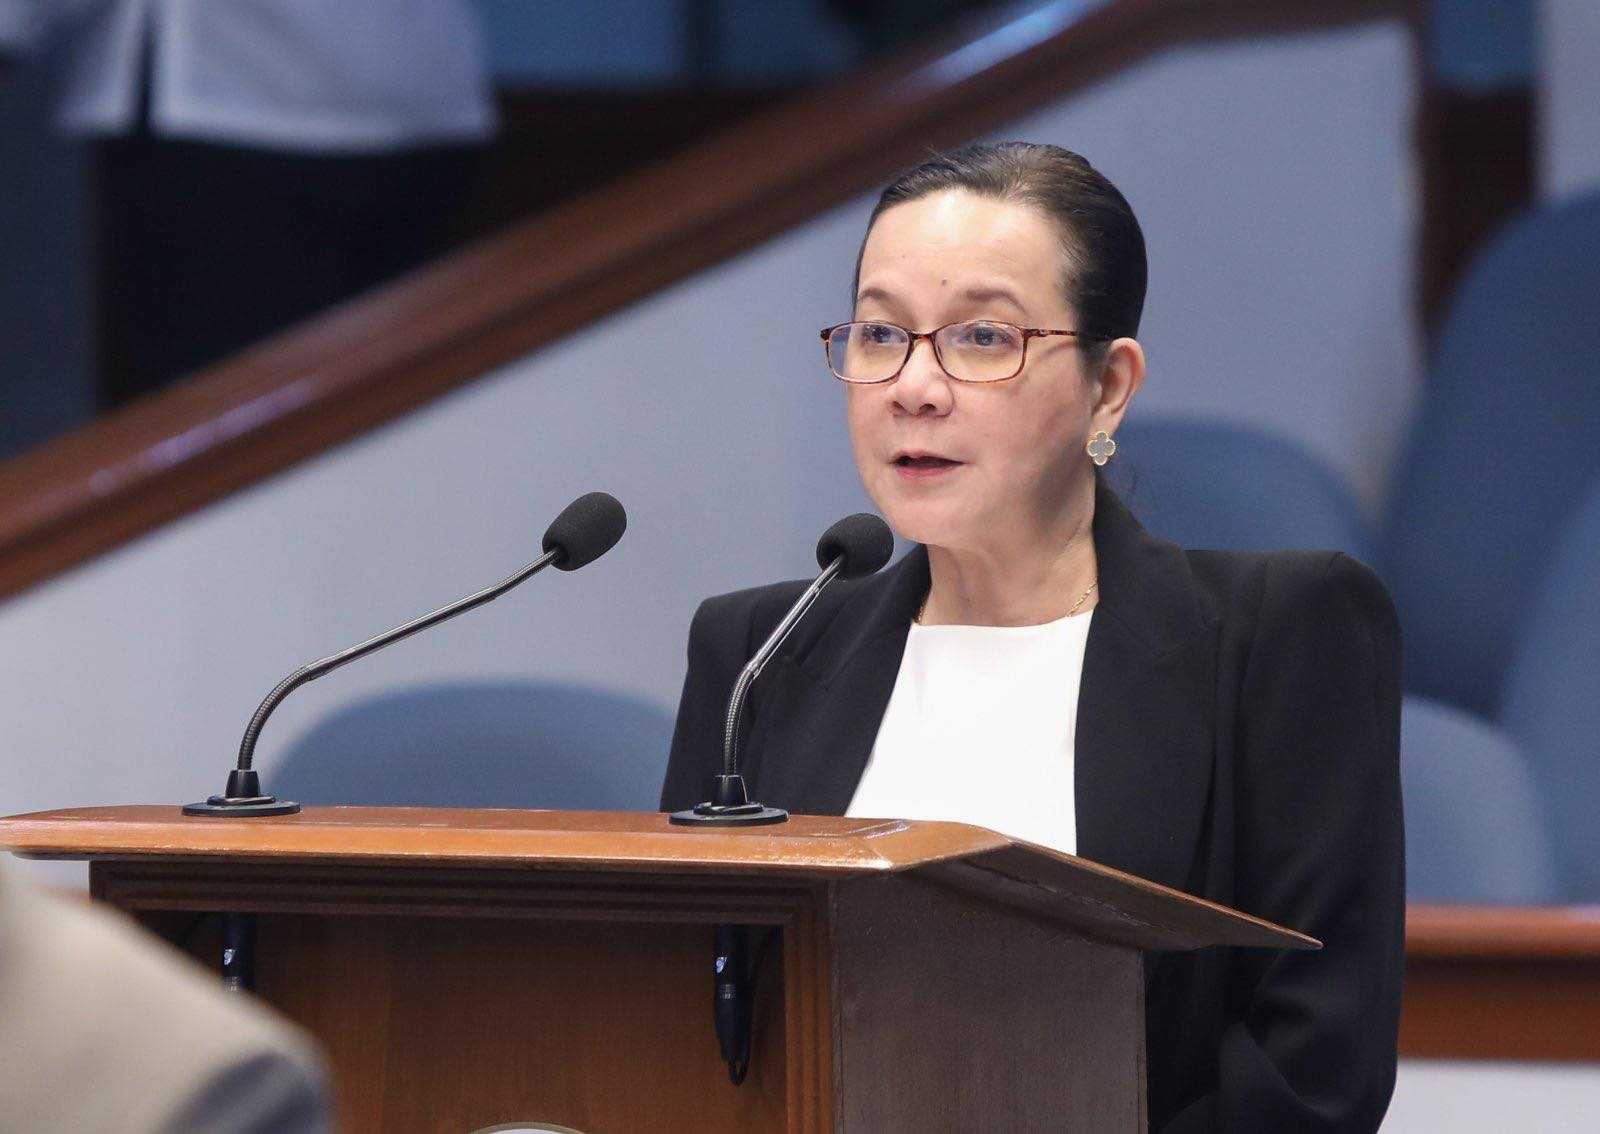 Implement ‘one-strike policy’ for corrupt OTS personnel – Poe